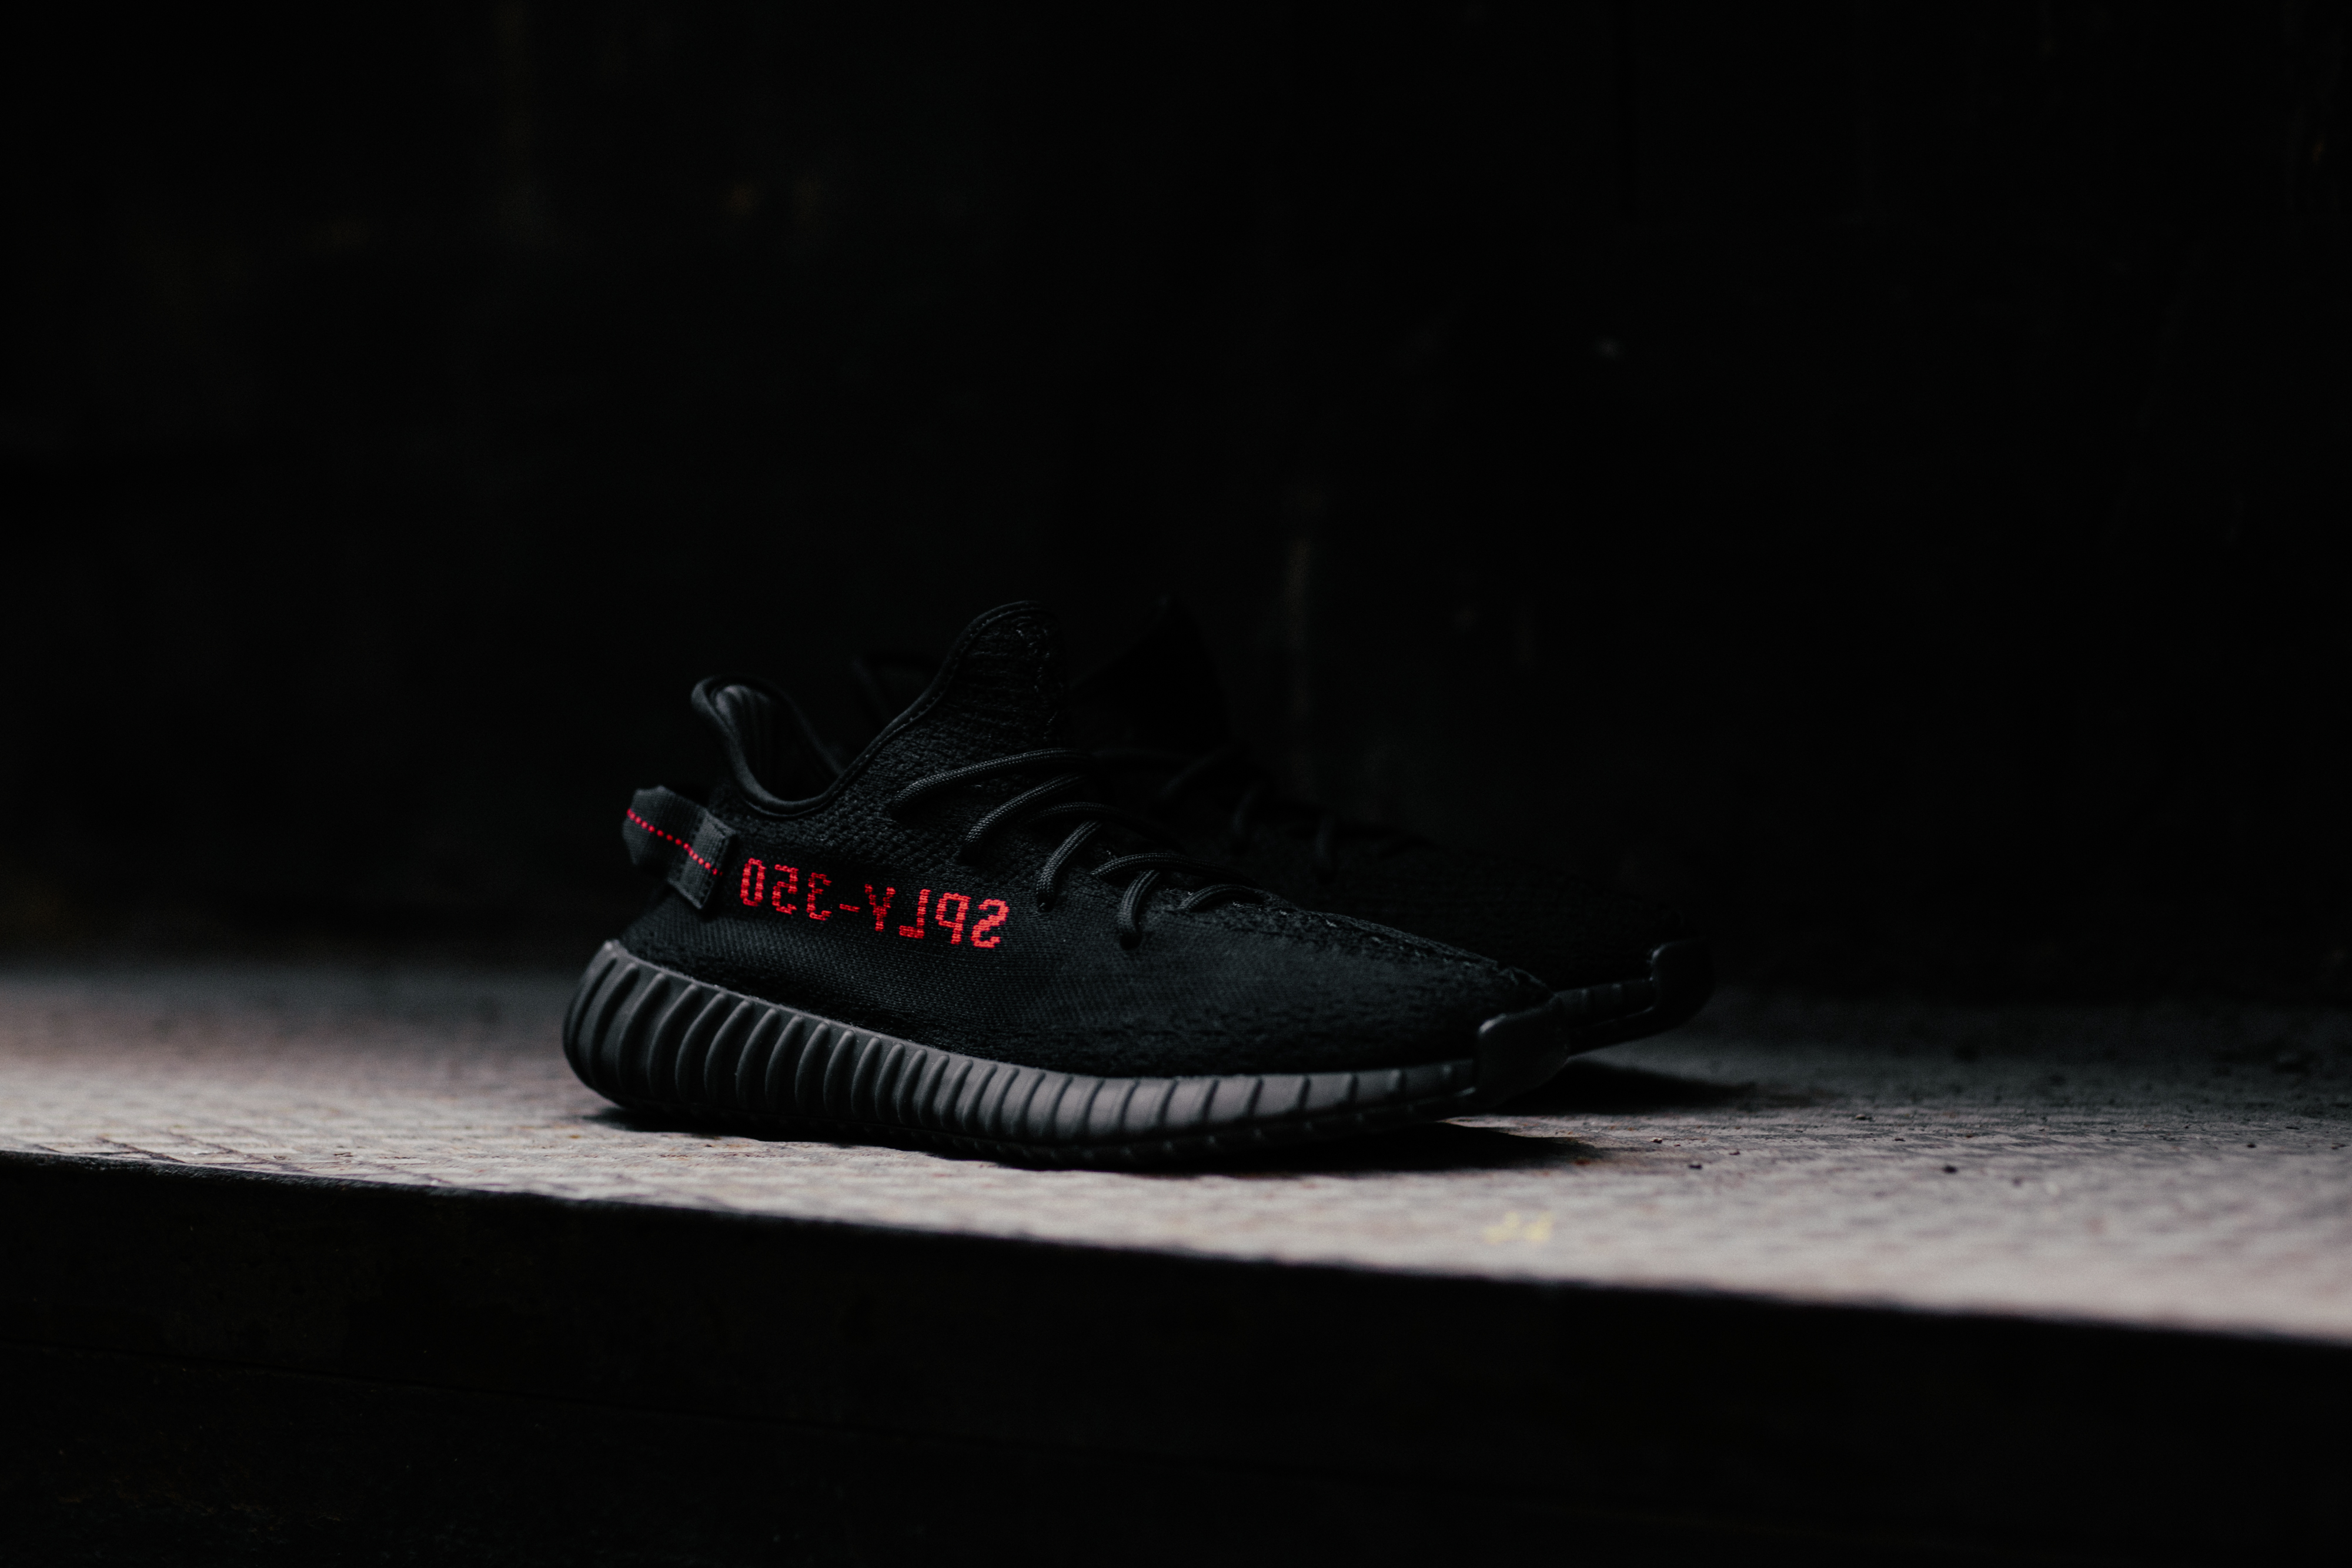 I bought fake yeezy 350 v2 Core Black (unboxing first impression)